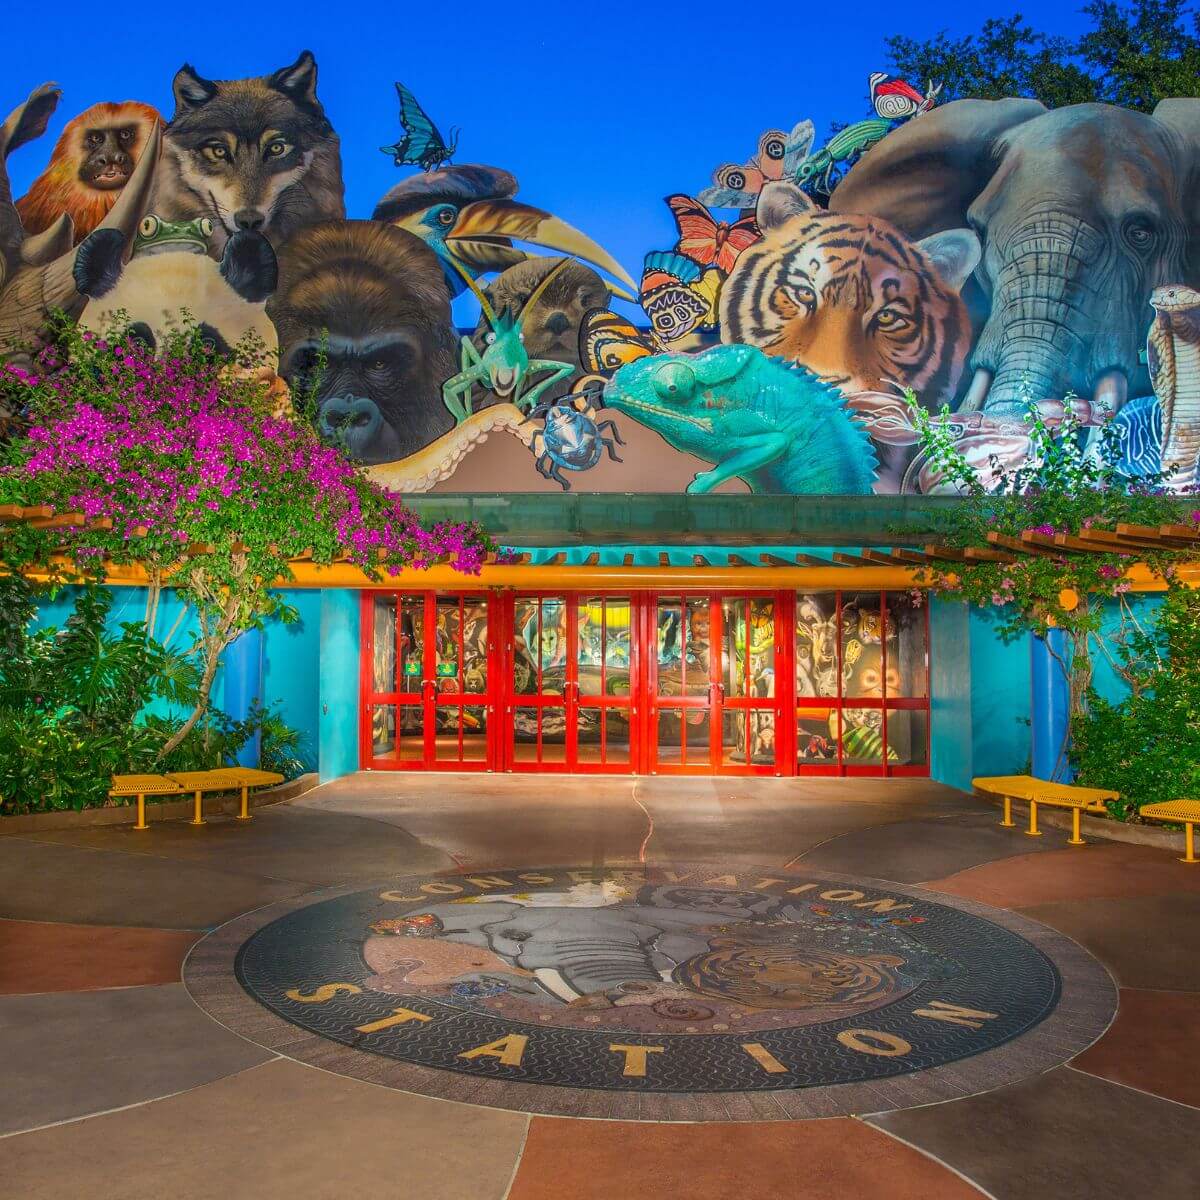 Photo of the Conservation Station at Rafiki's Planet Watch in Animal Kingdom.